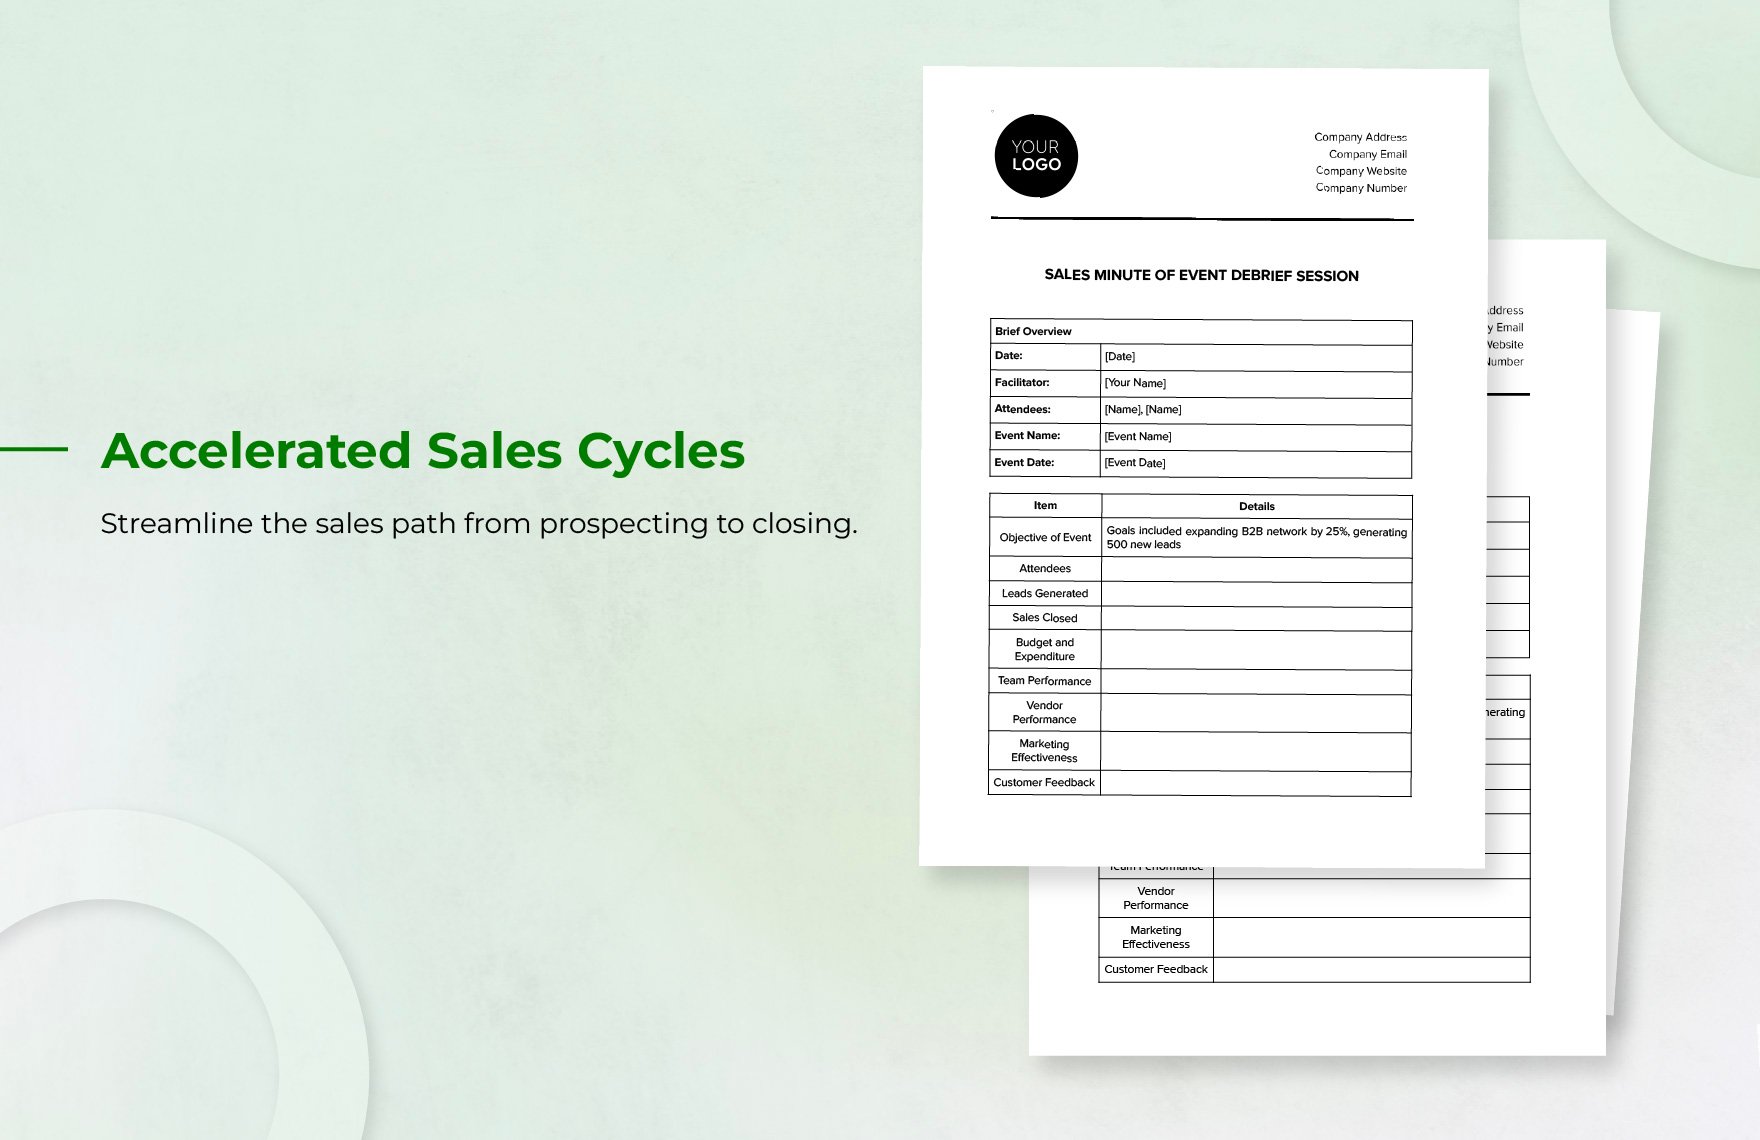 Sales Minute of Event Debrief Session Template